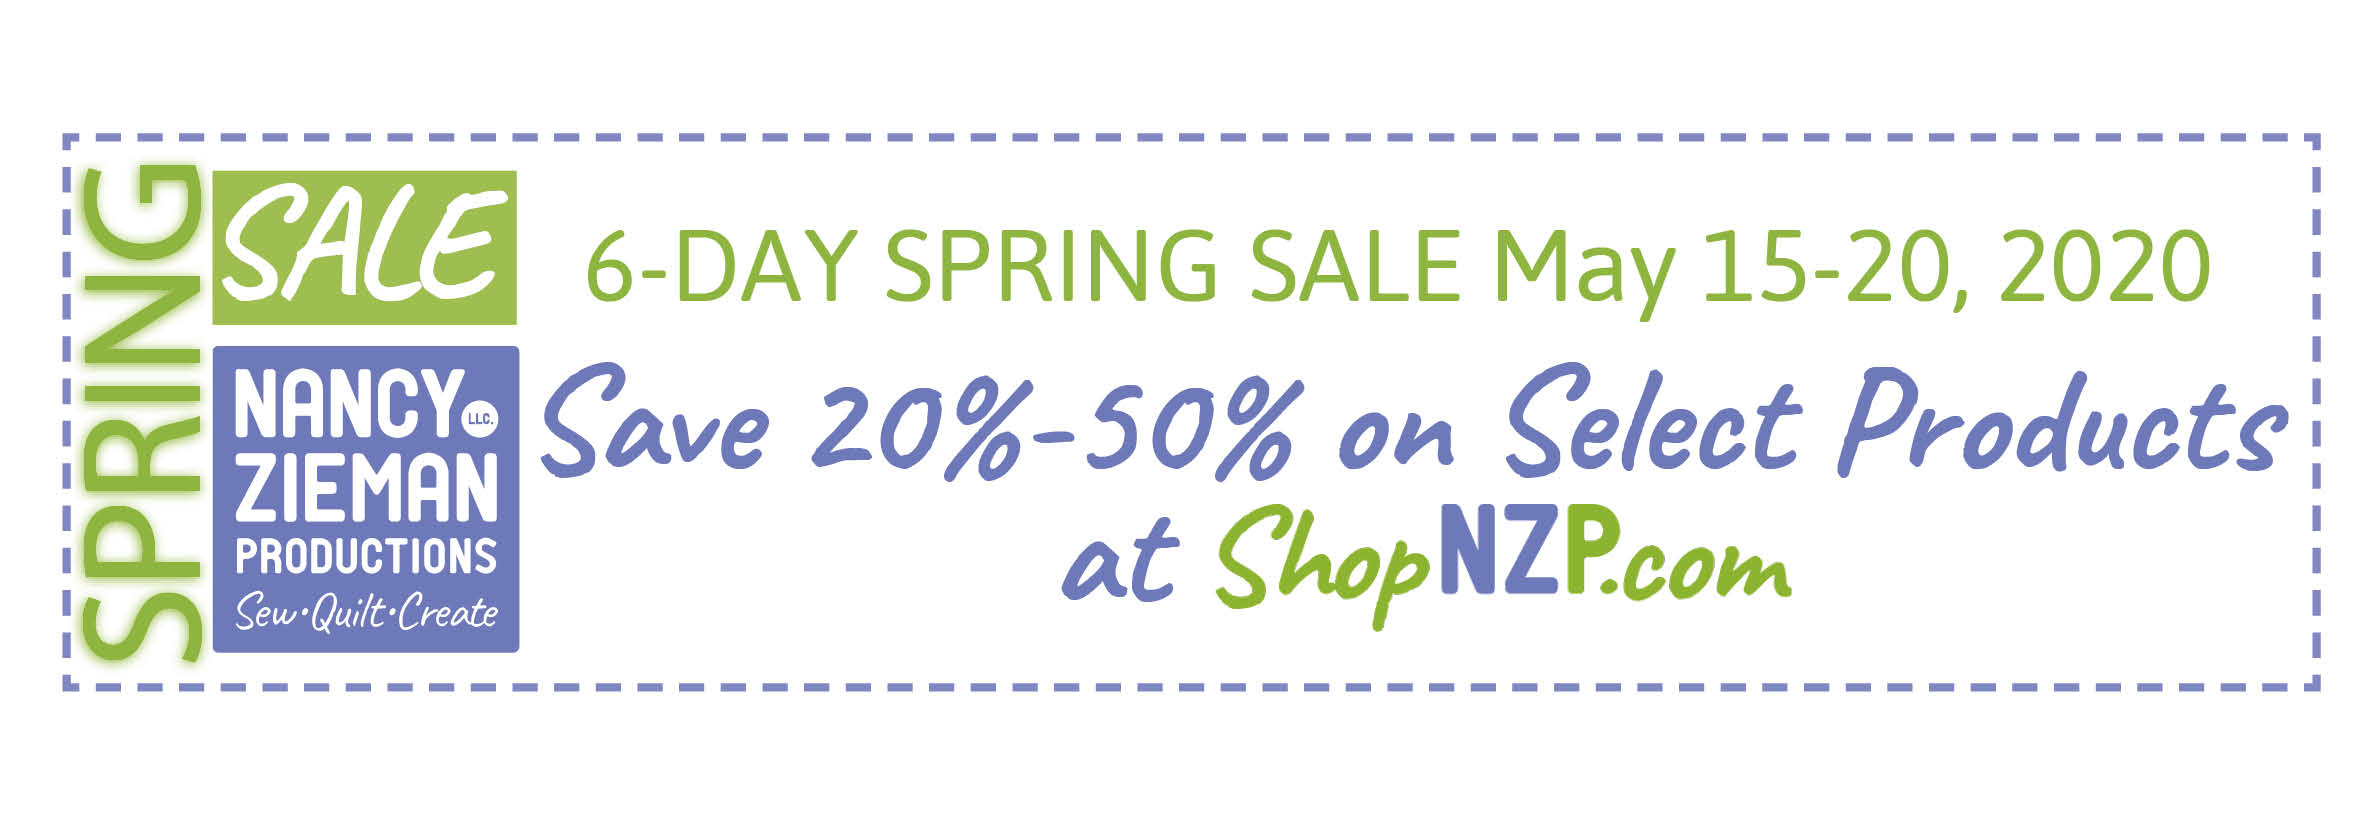 Spring Sale May 15-20, 2020 at ShopNZP.com